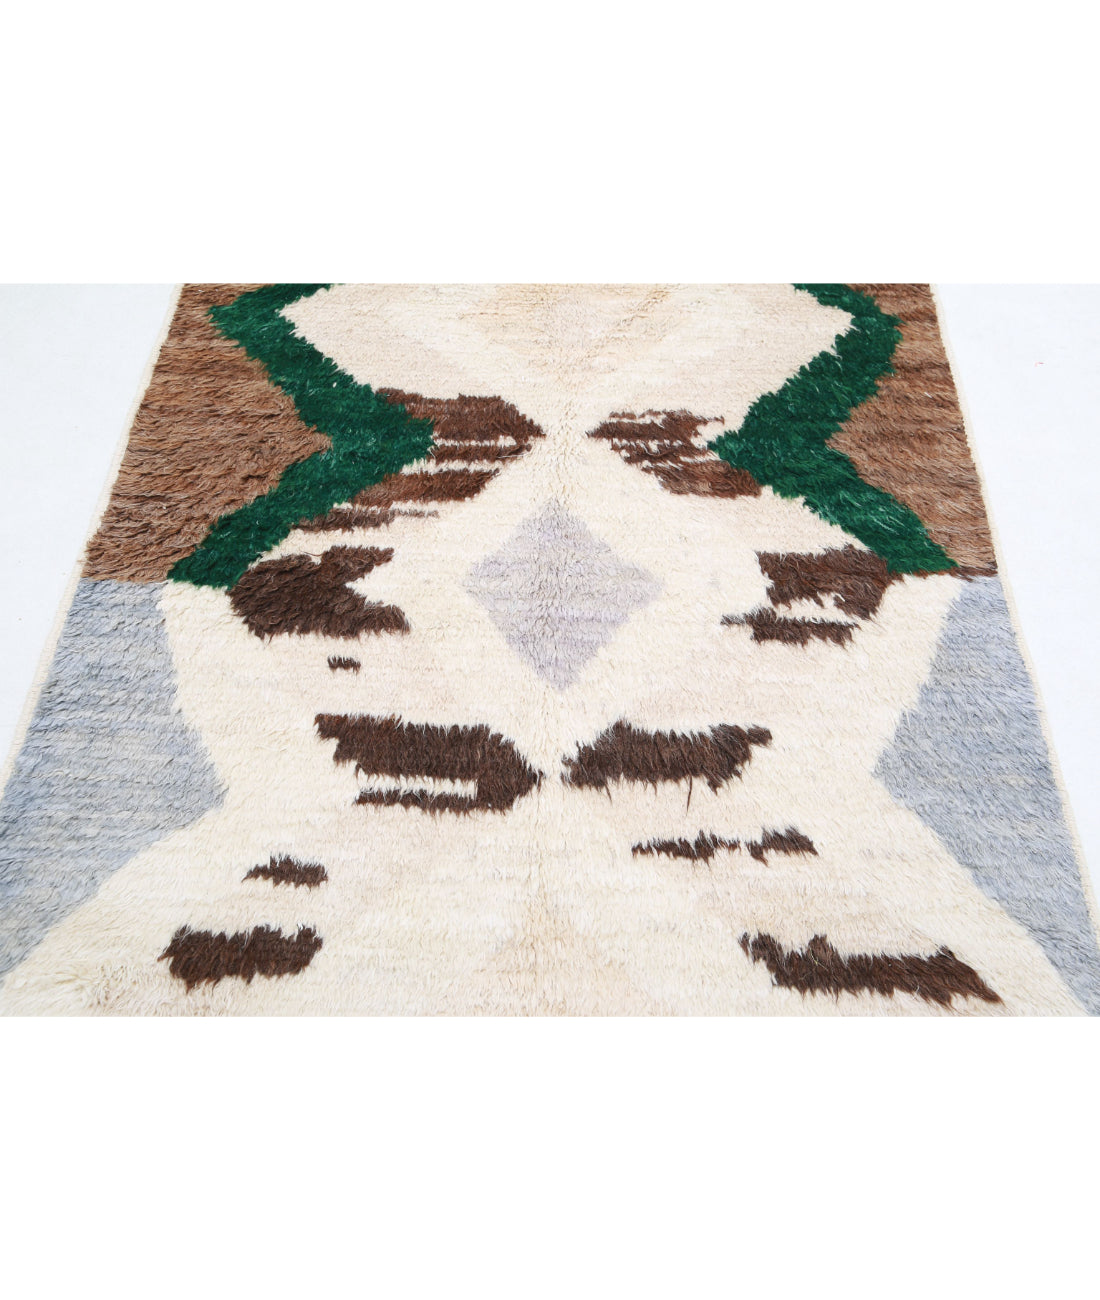 Hand Knotted Tribal Moroccan Wool Rug - 4'1'' x 6'0'' 4'1'' x 6'0'' (123 X 180) / Multi / Multi